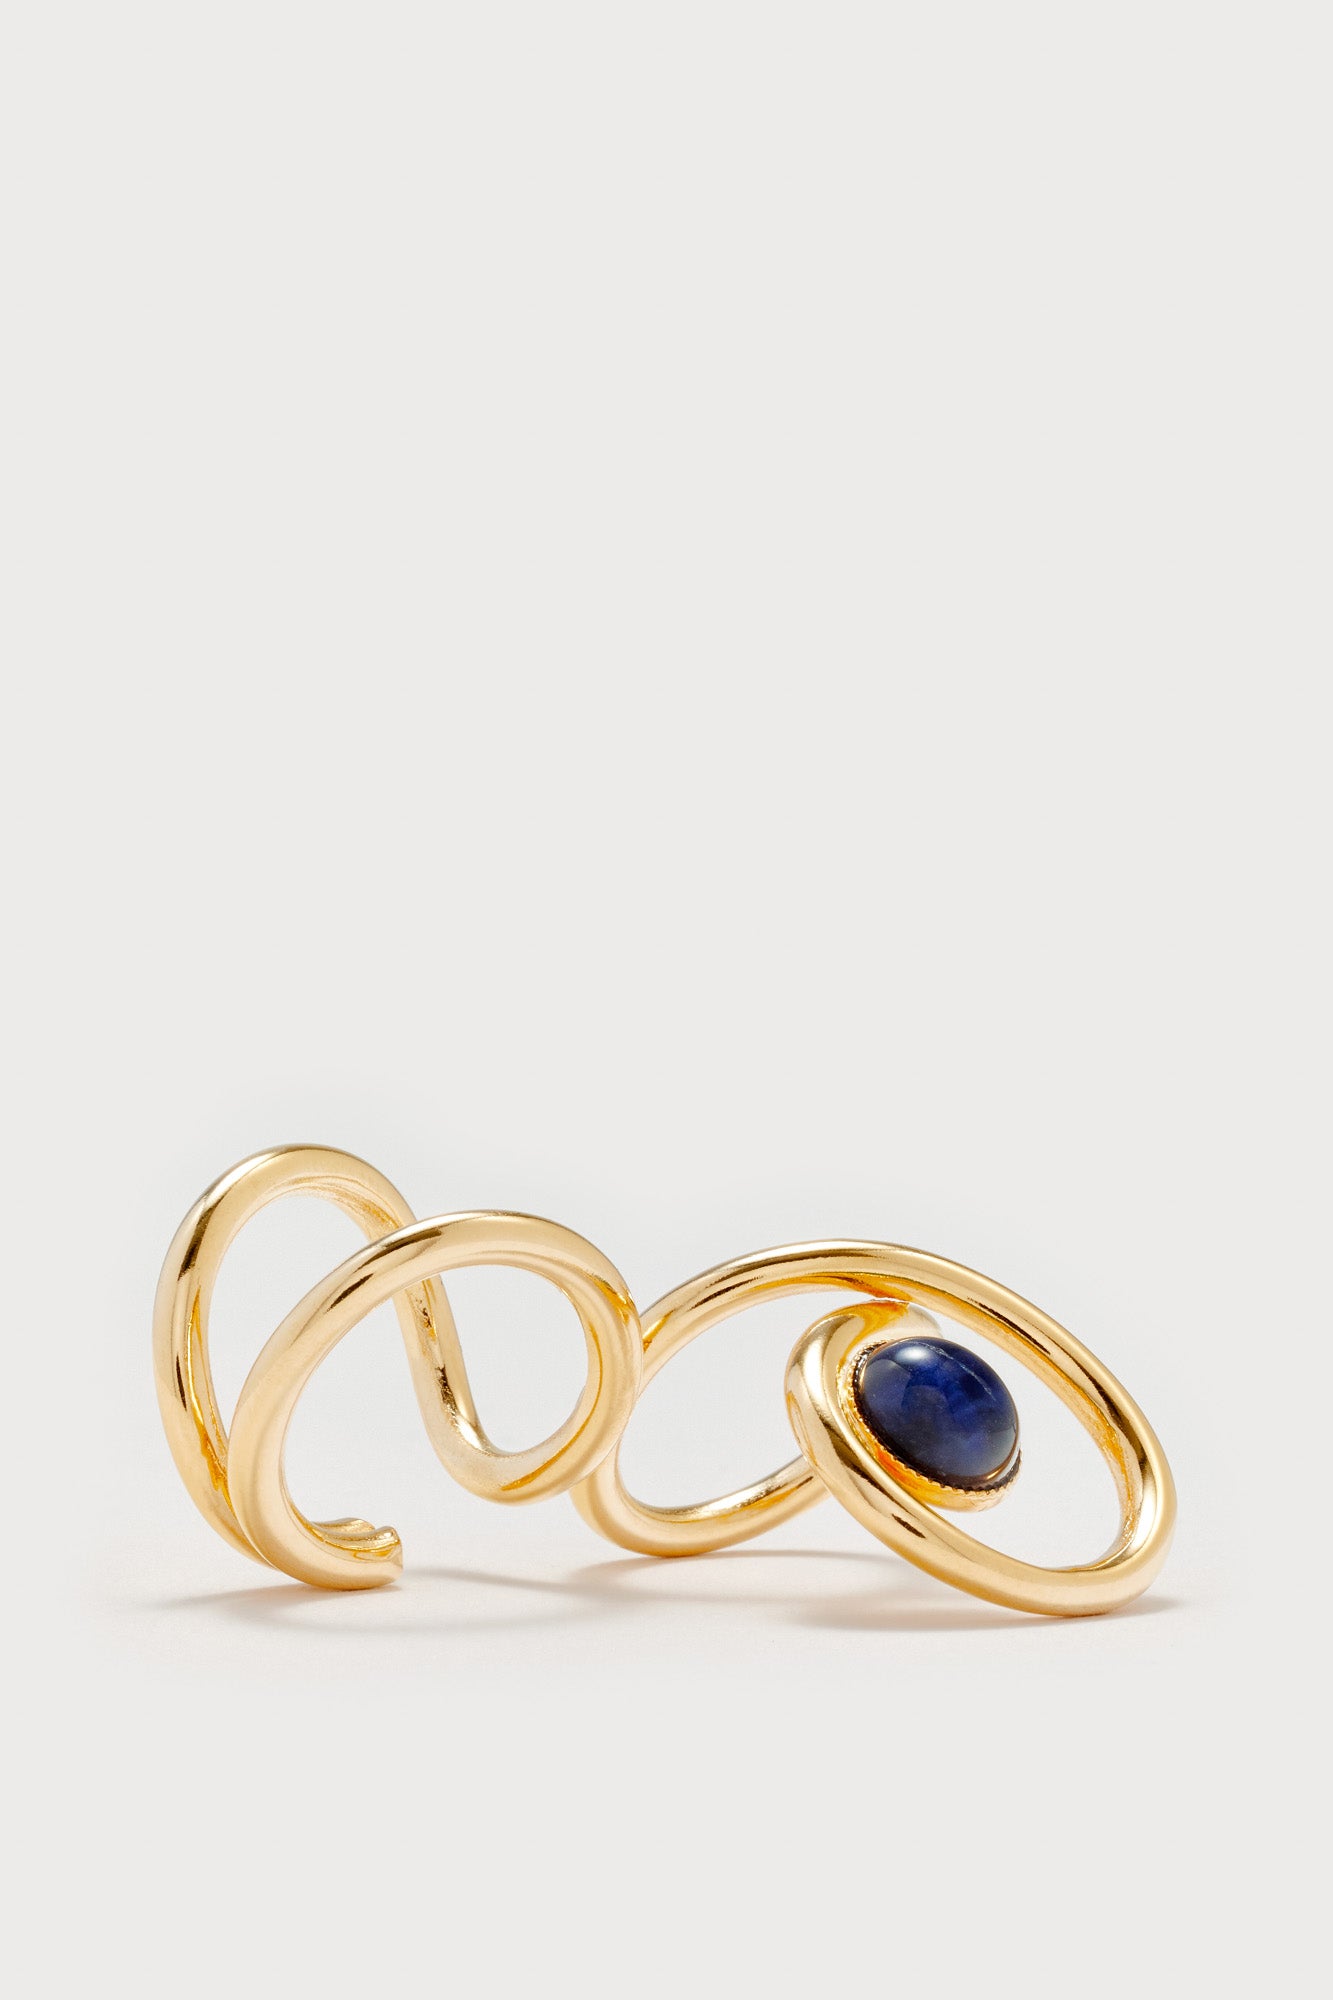 Gold Double Ring with Dark Blue Stone